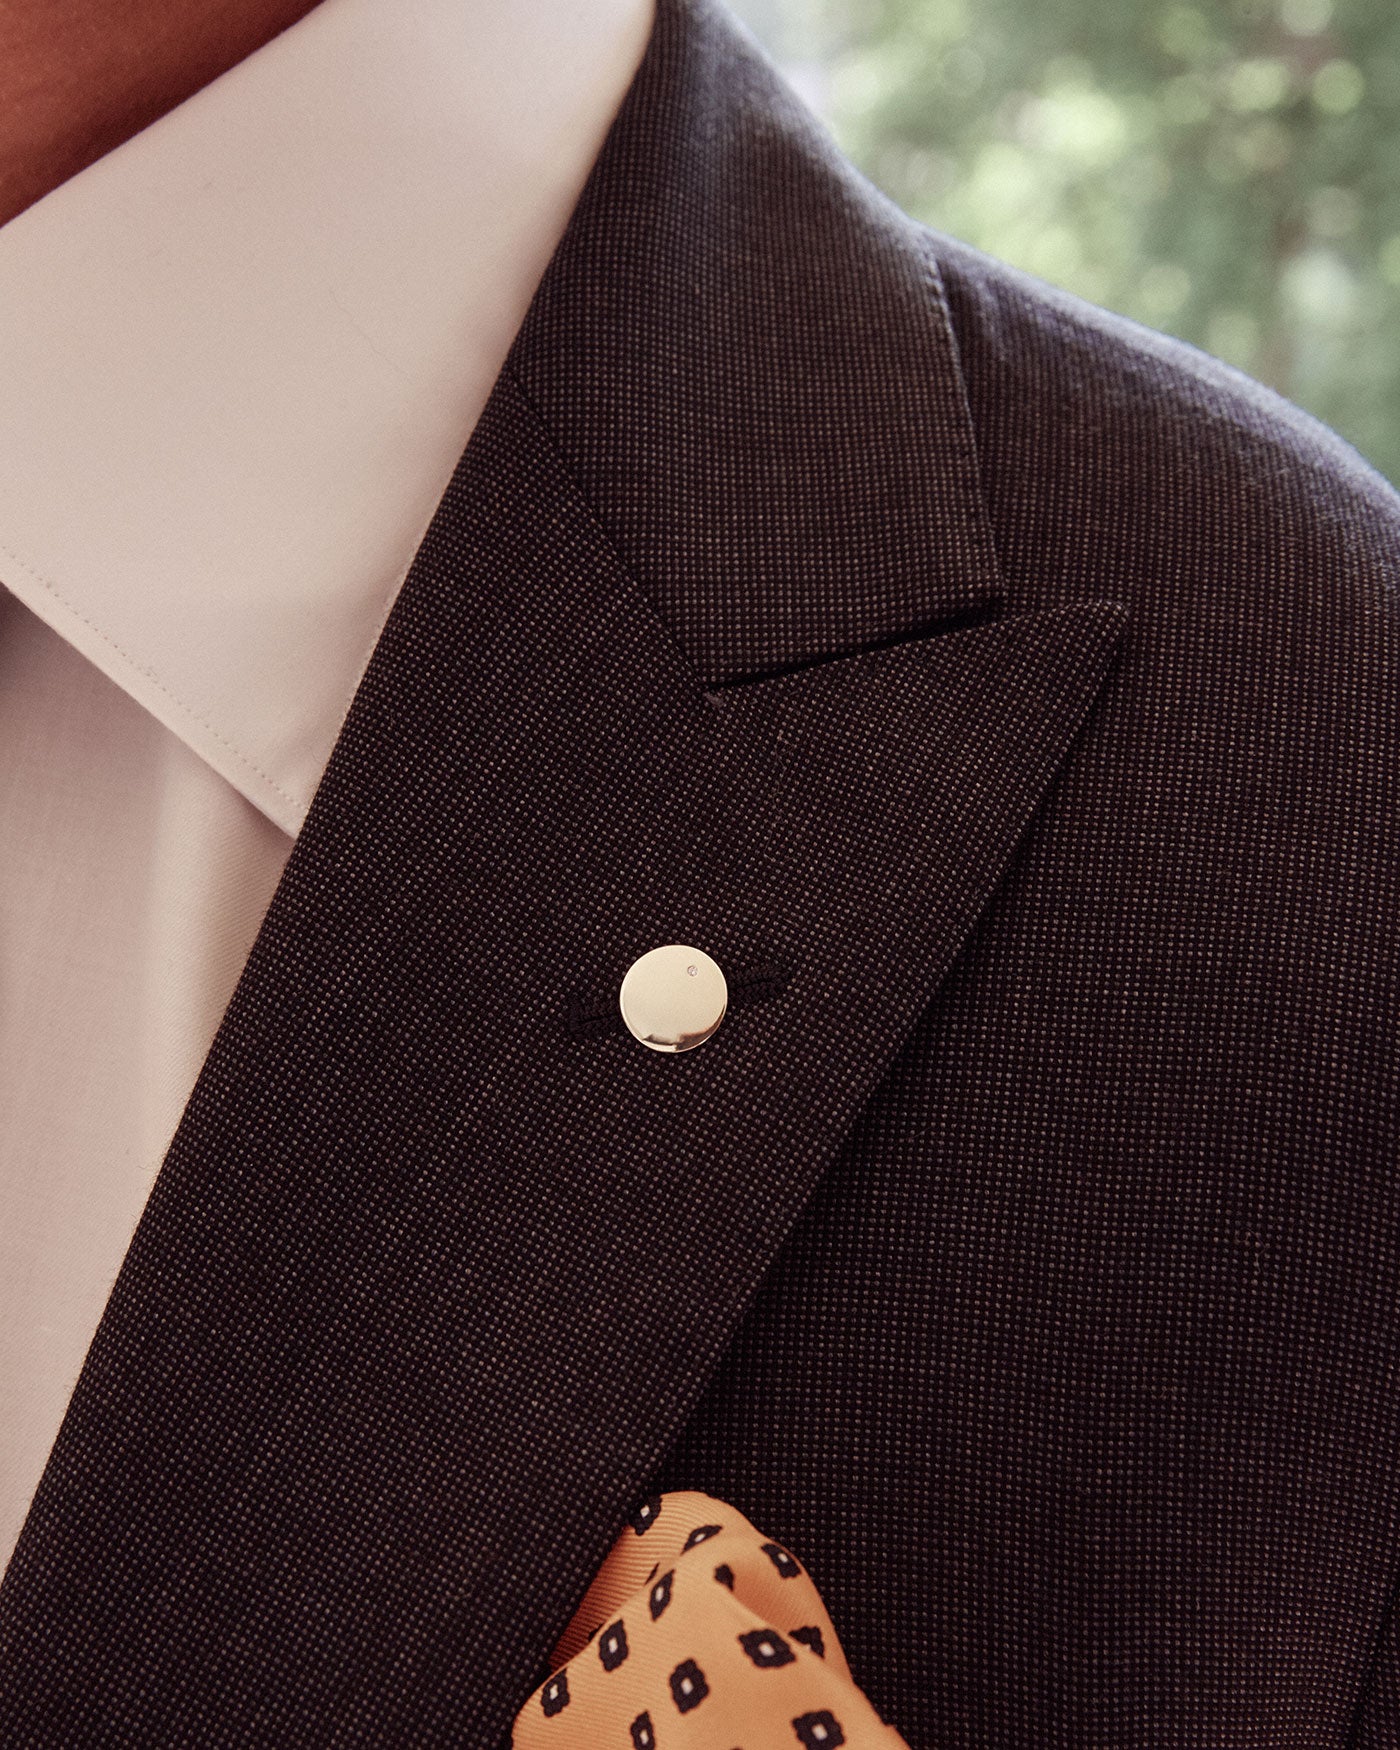 Polished gold lapel pin being worn by a man